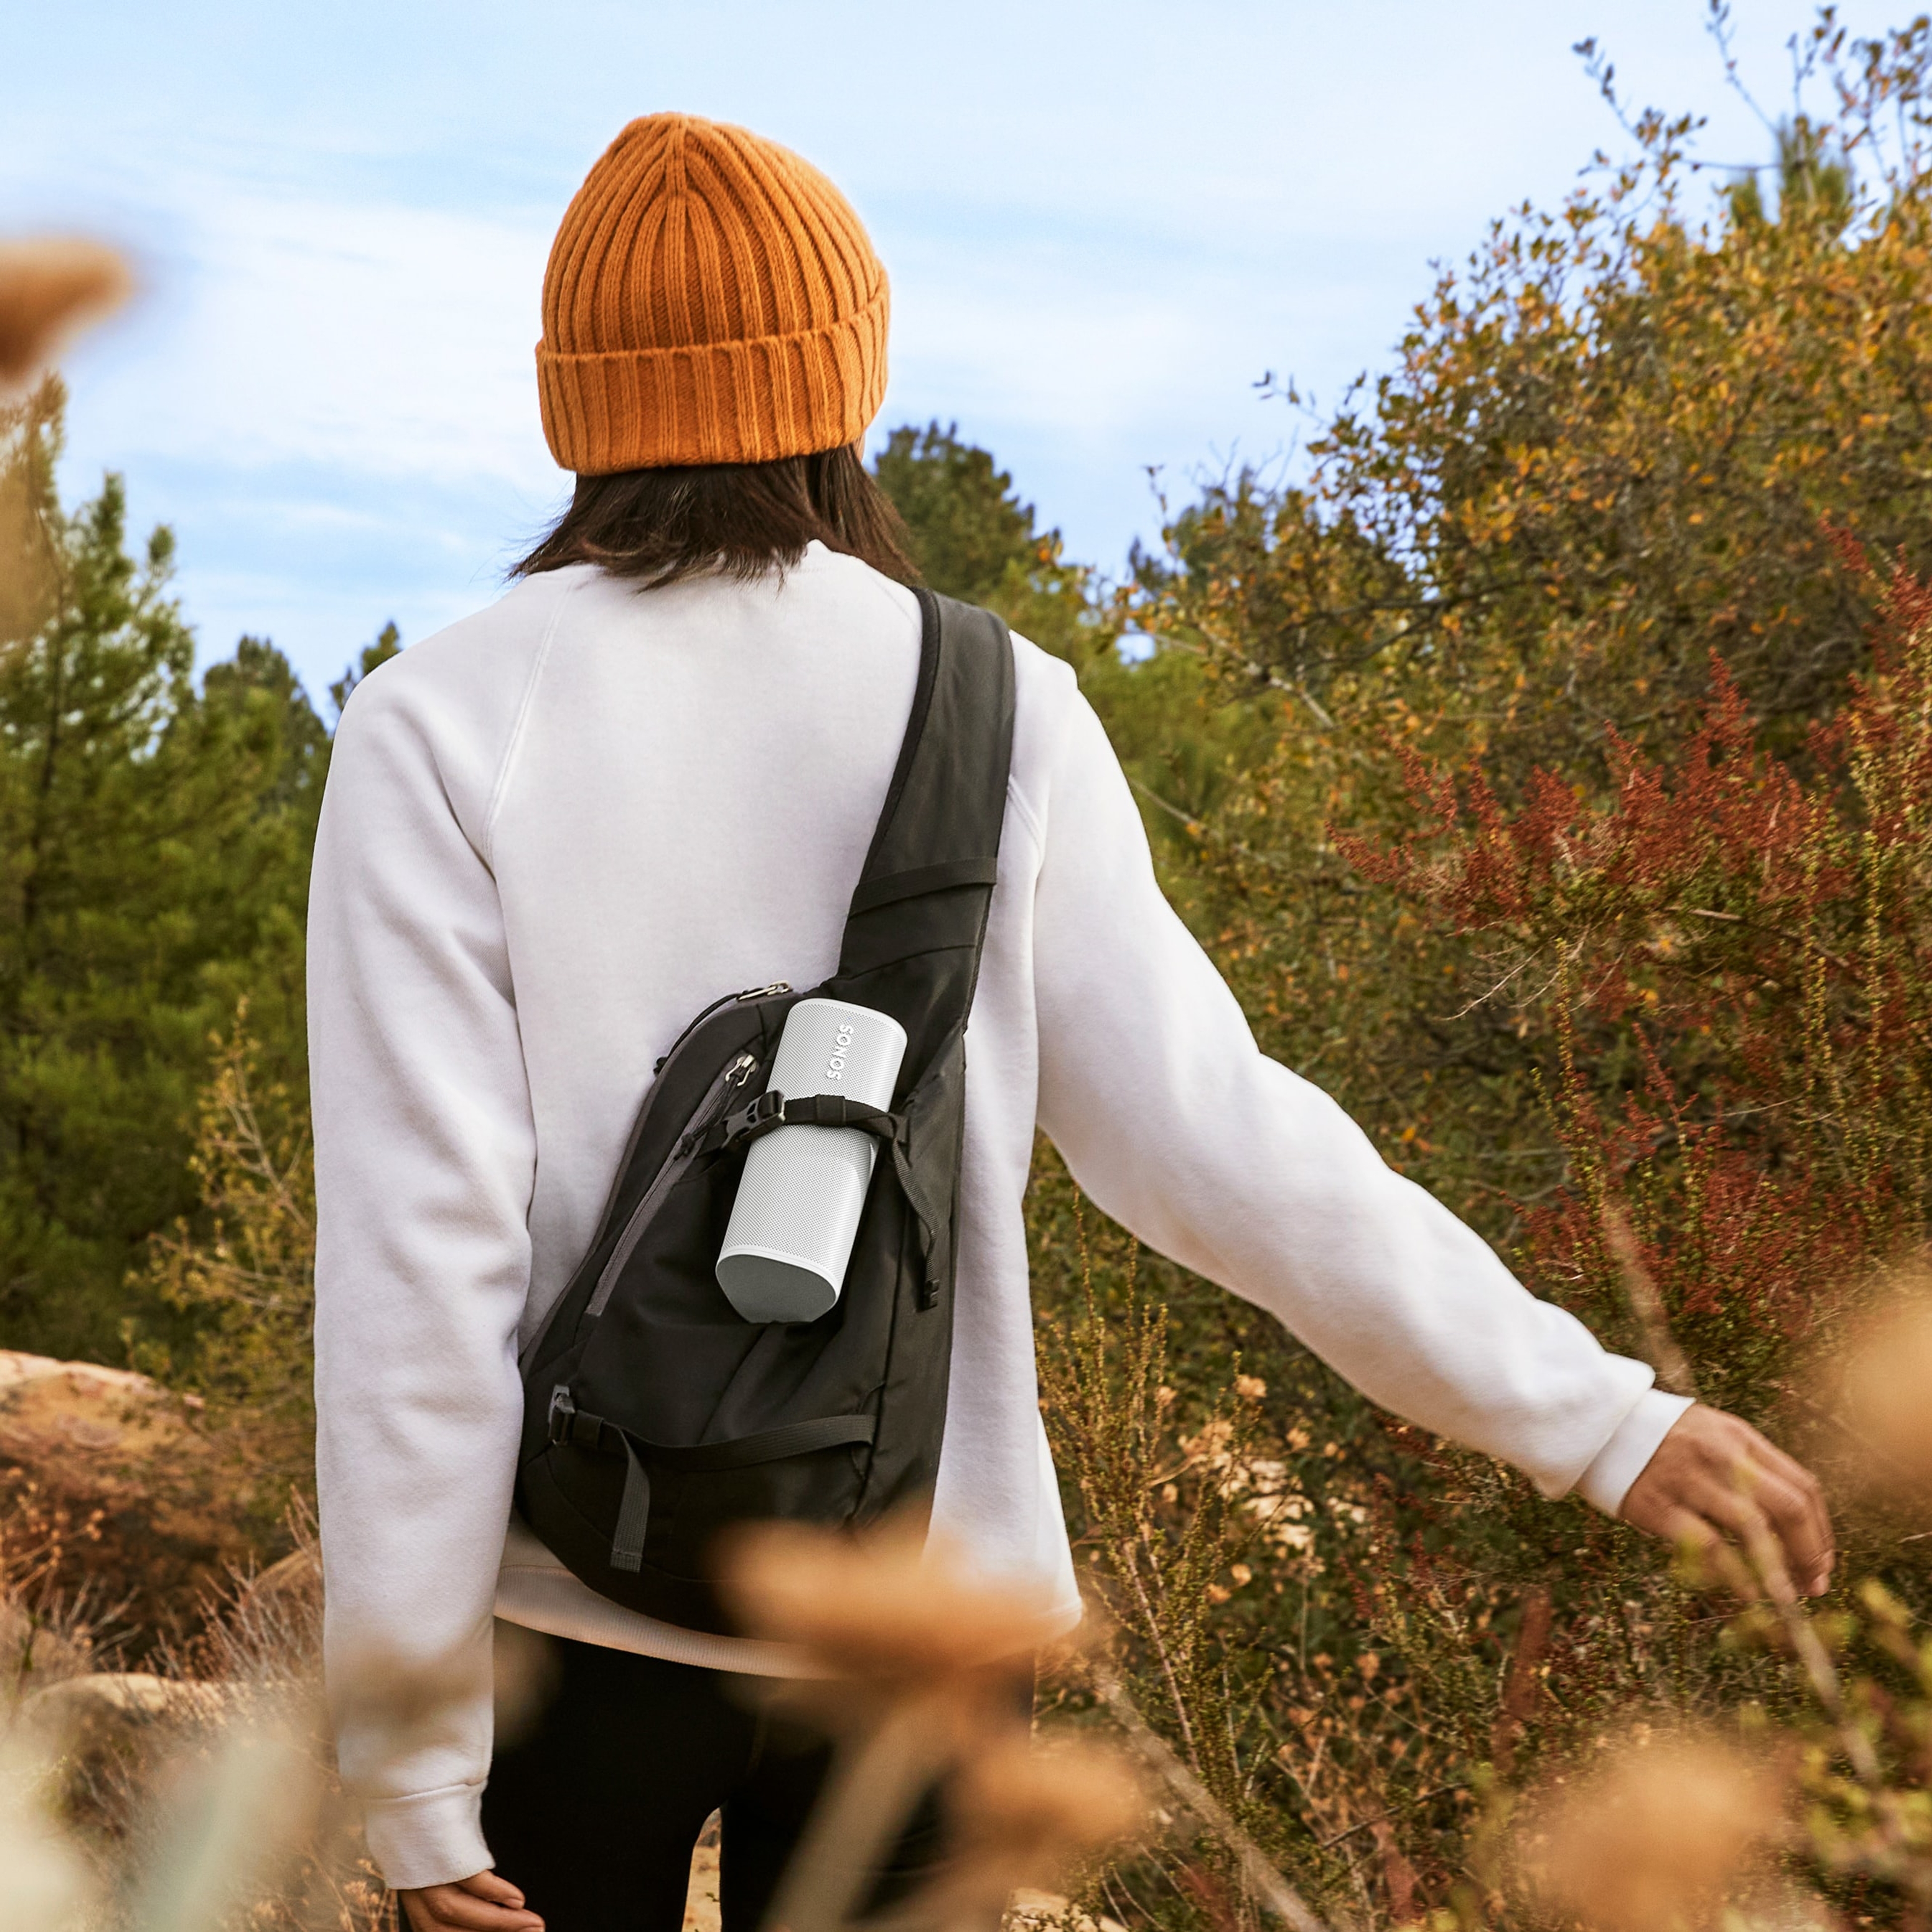 Roam 2 white on a backpack outdoors